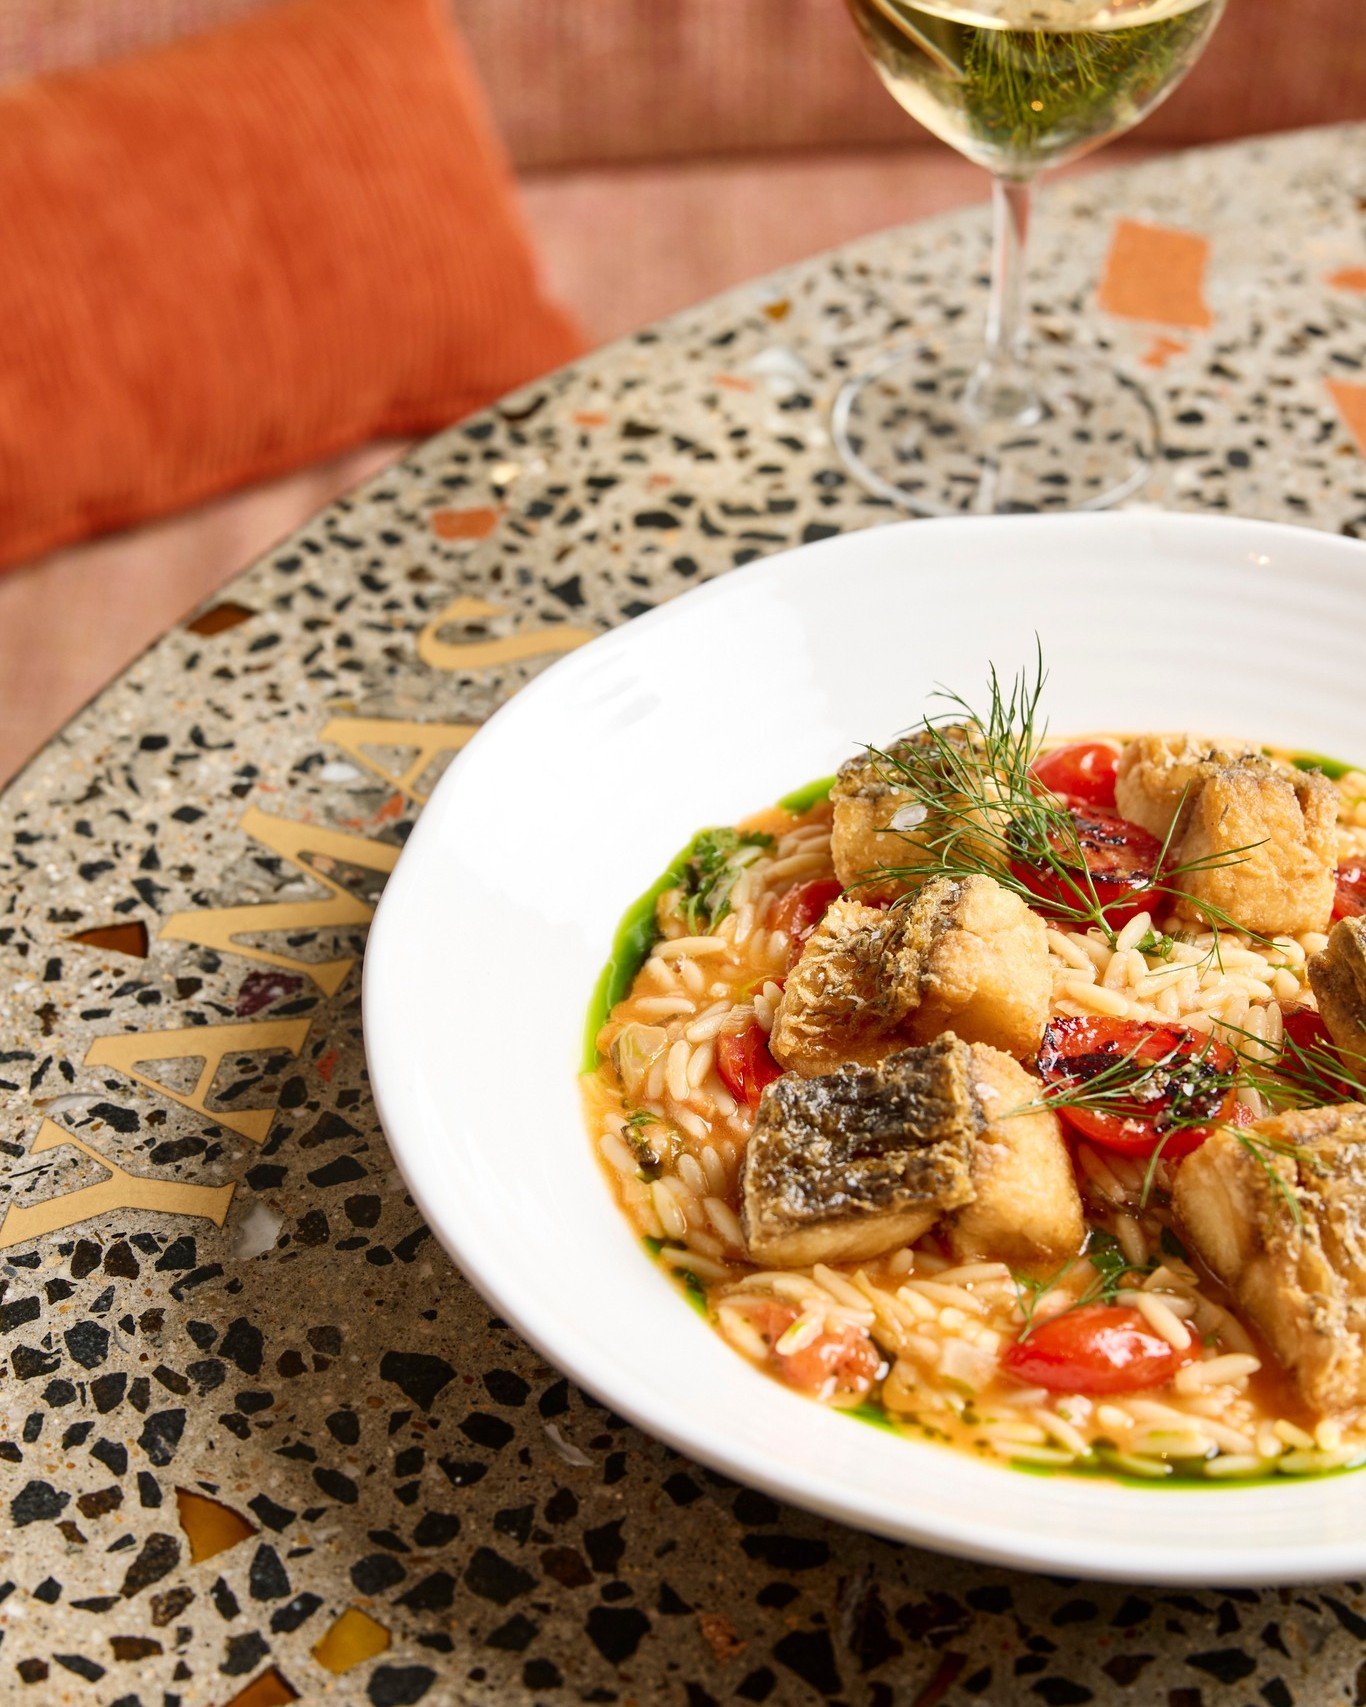 Experience the golden crispiness of our fried barramundi paired with orzo pasta, tomatoes, garlic, and a hint of white wine.

www.yamasrestaurant.com.au/bookings to reserve your table or call us on (07) 2101 5000
45 Mollison St, West End QLD 4101

#y